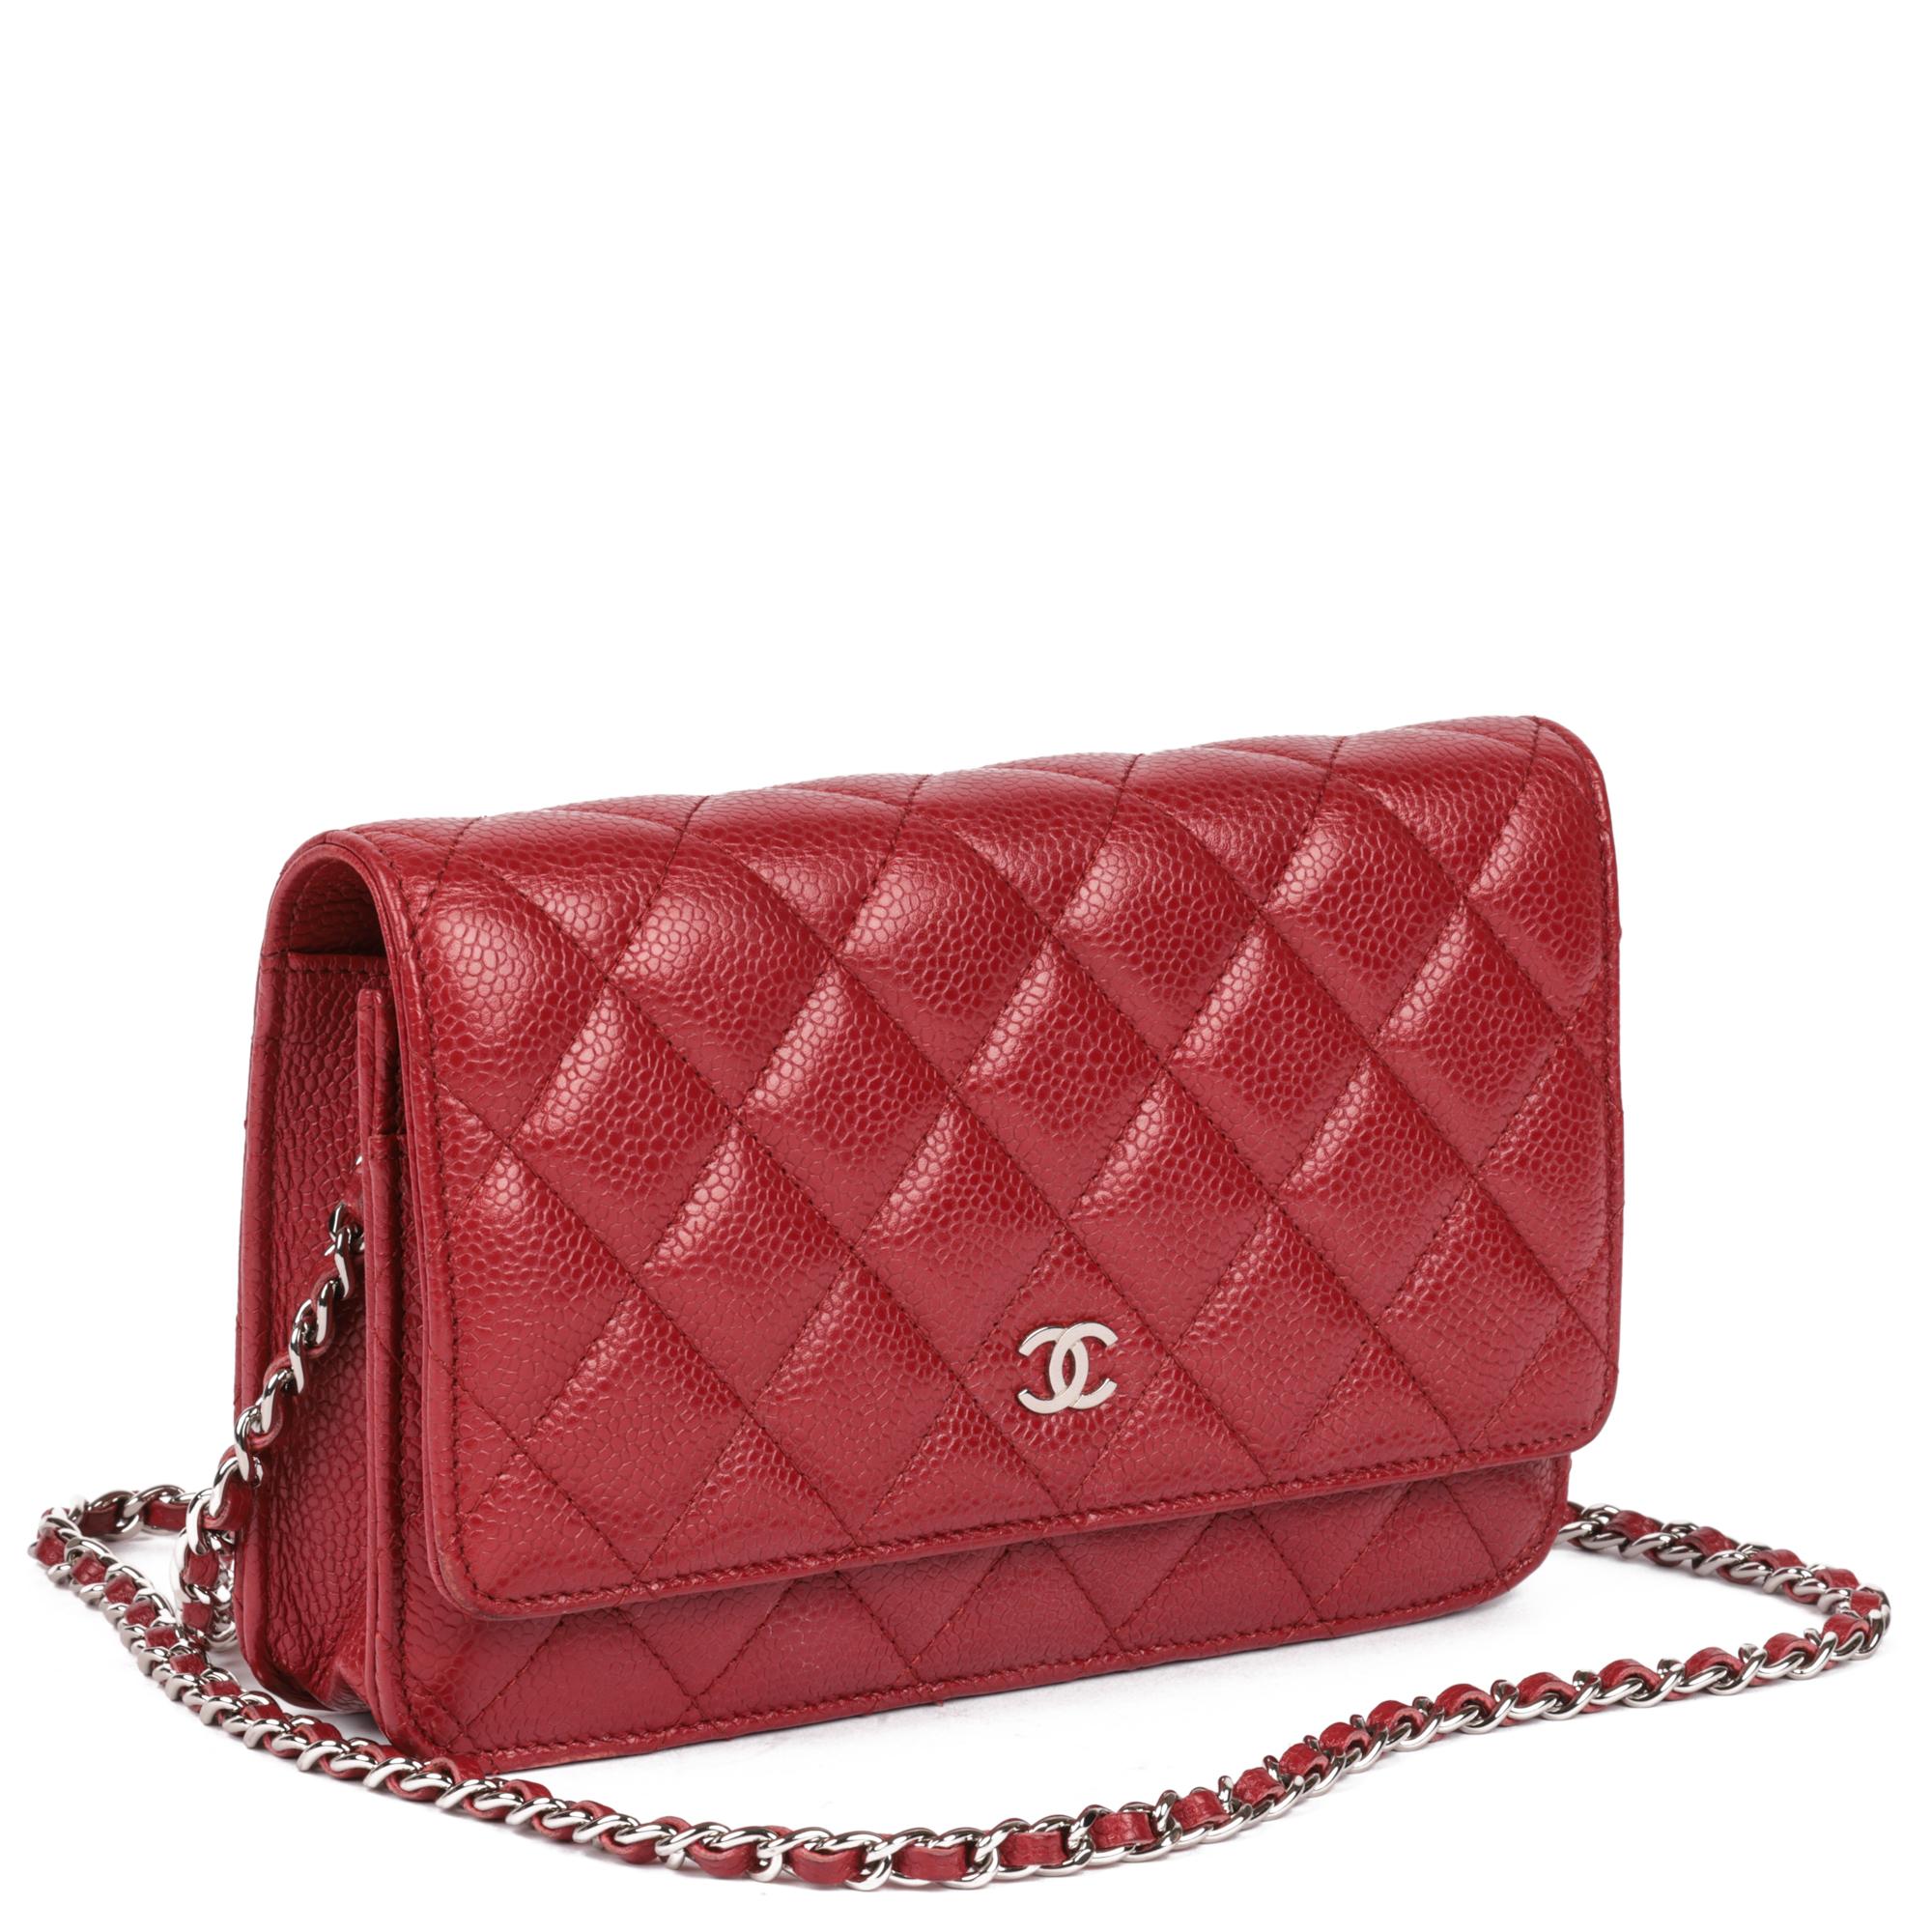 CHANEL
Red Quilted Caviar Leather Wallet-on-Chain WOC

Xupes Reference: HB5040
Serial Number: 19797670
Age (Circa): 2014
Accompanied By: Chanel Dust Bag 
Authenticity Details: 
Gender: Ladies
Type: Shoulder, Crossbody

Colour: Red
Hardware: